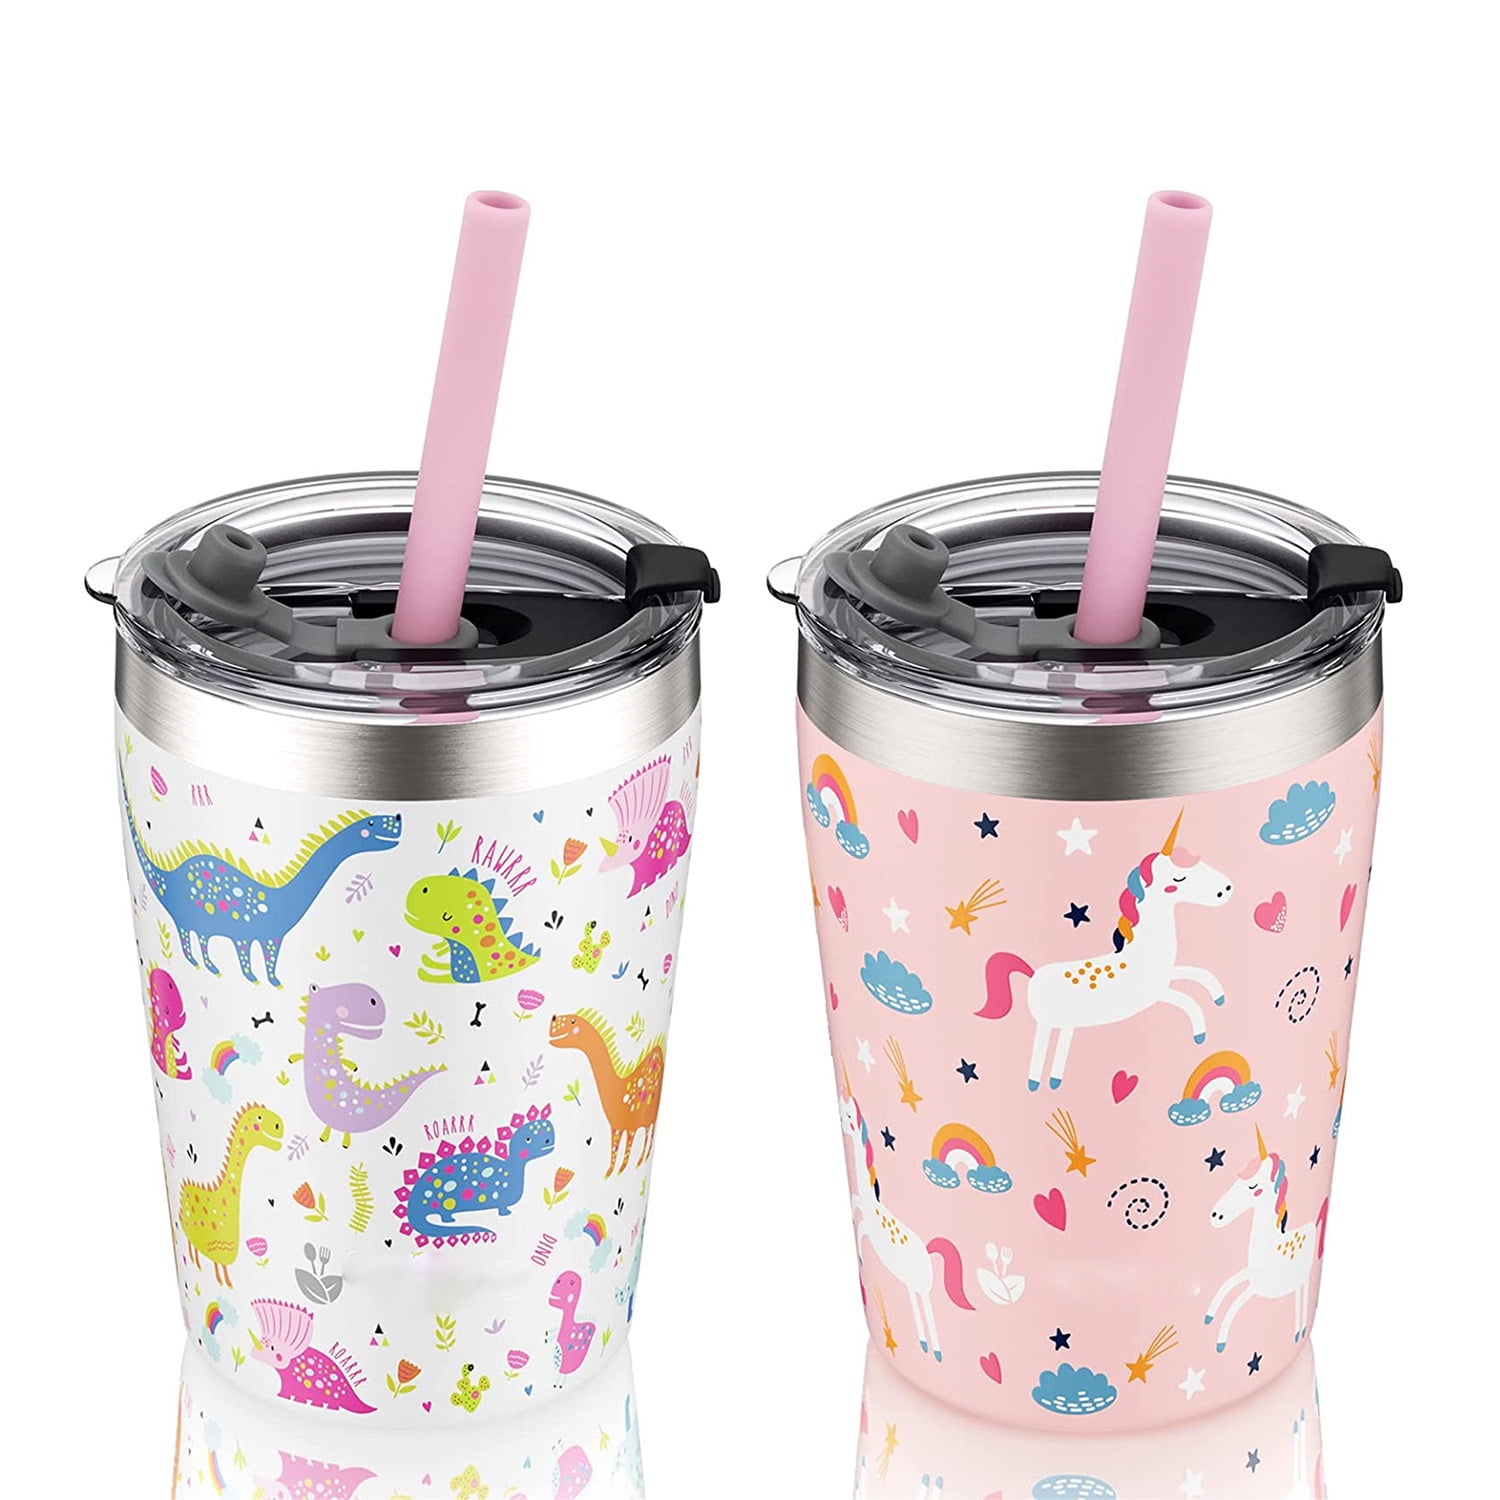 Kids and Toddler Stainless Steel Tumbler Cups 8.5 OZ - Silver, Set of 2